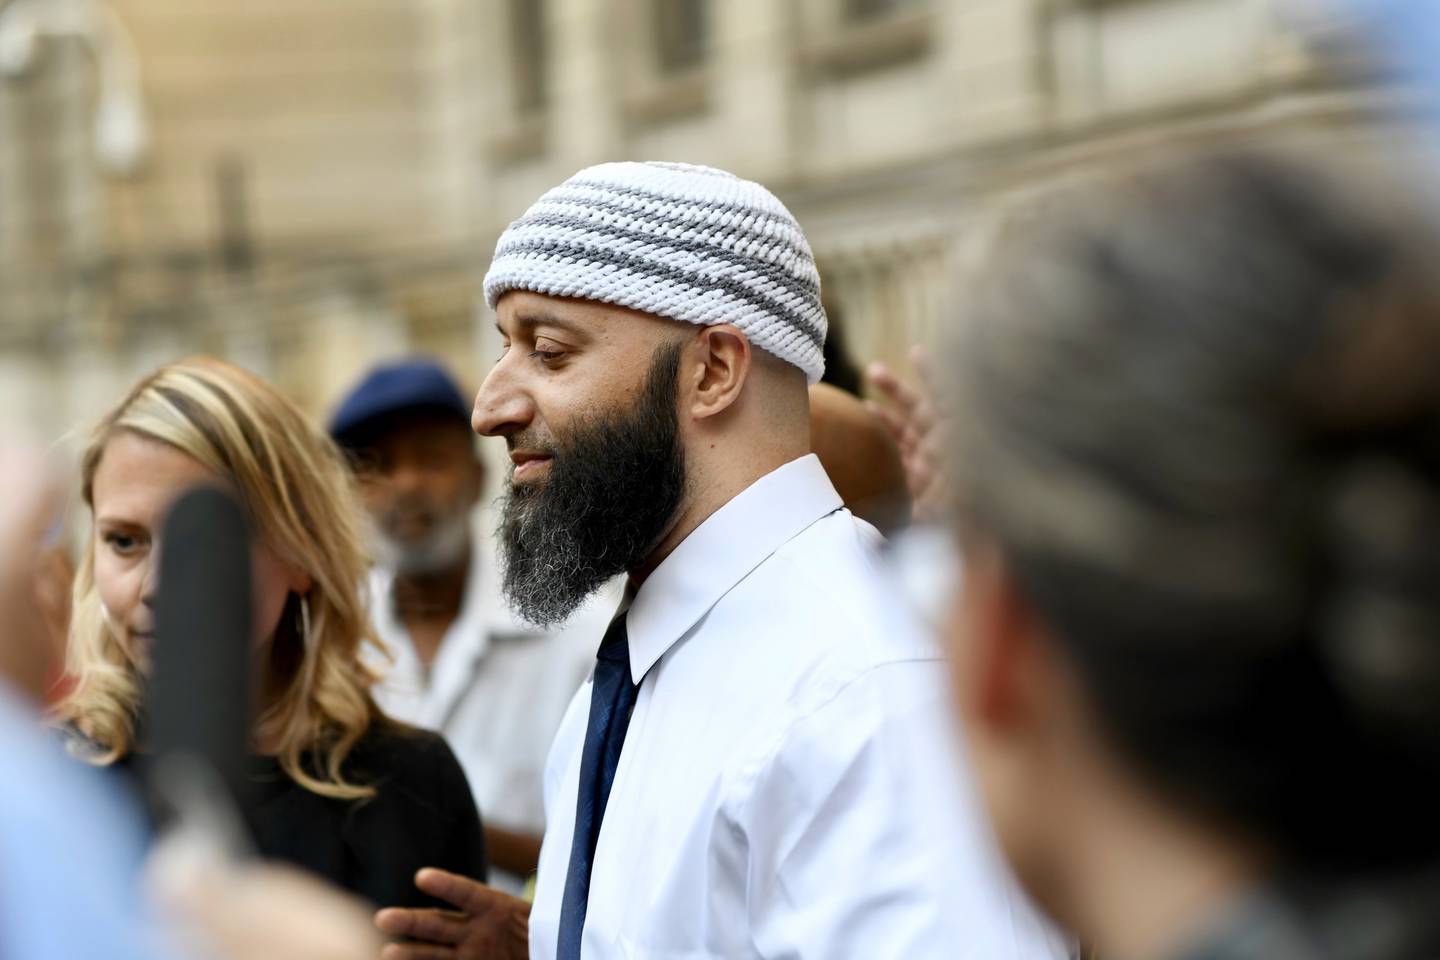 Baltimore judge Melissa Phinn threw out Adnan Syed's murder conviction in light of new evidence that someone else could have strangled Hae Min Lee, ordered the release of  Syed.